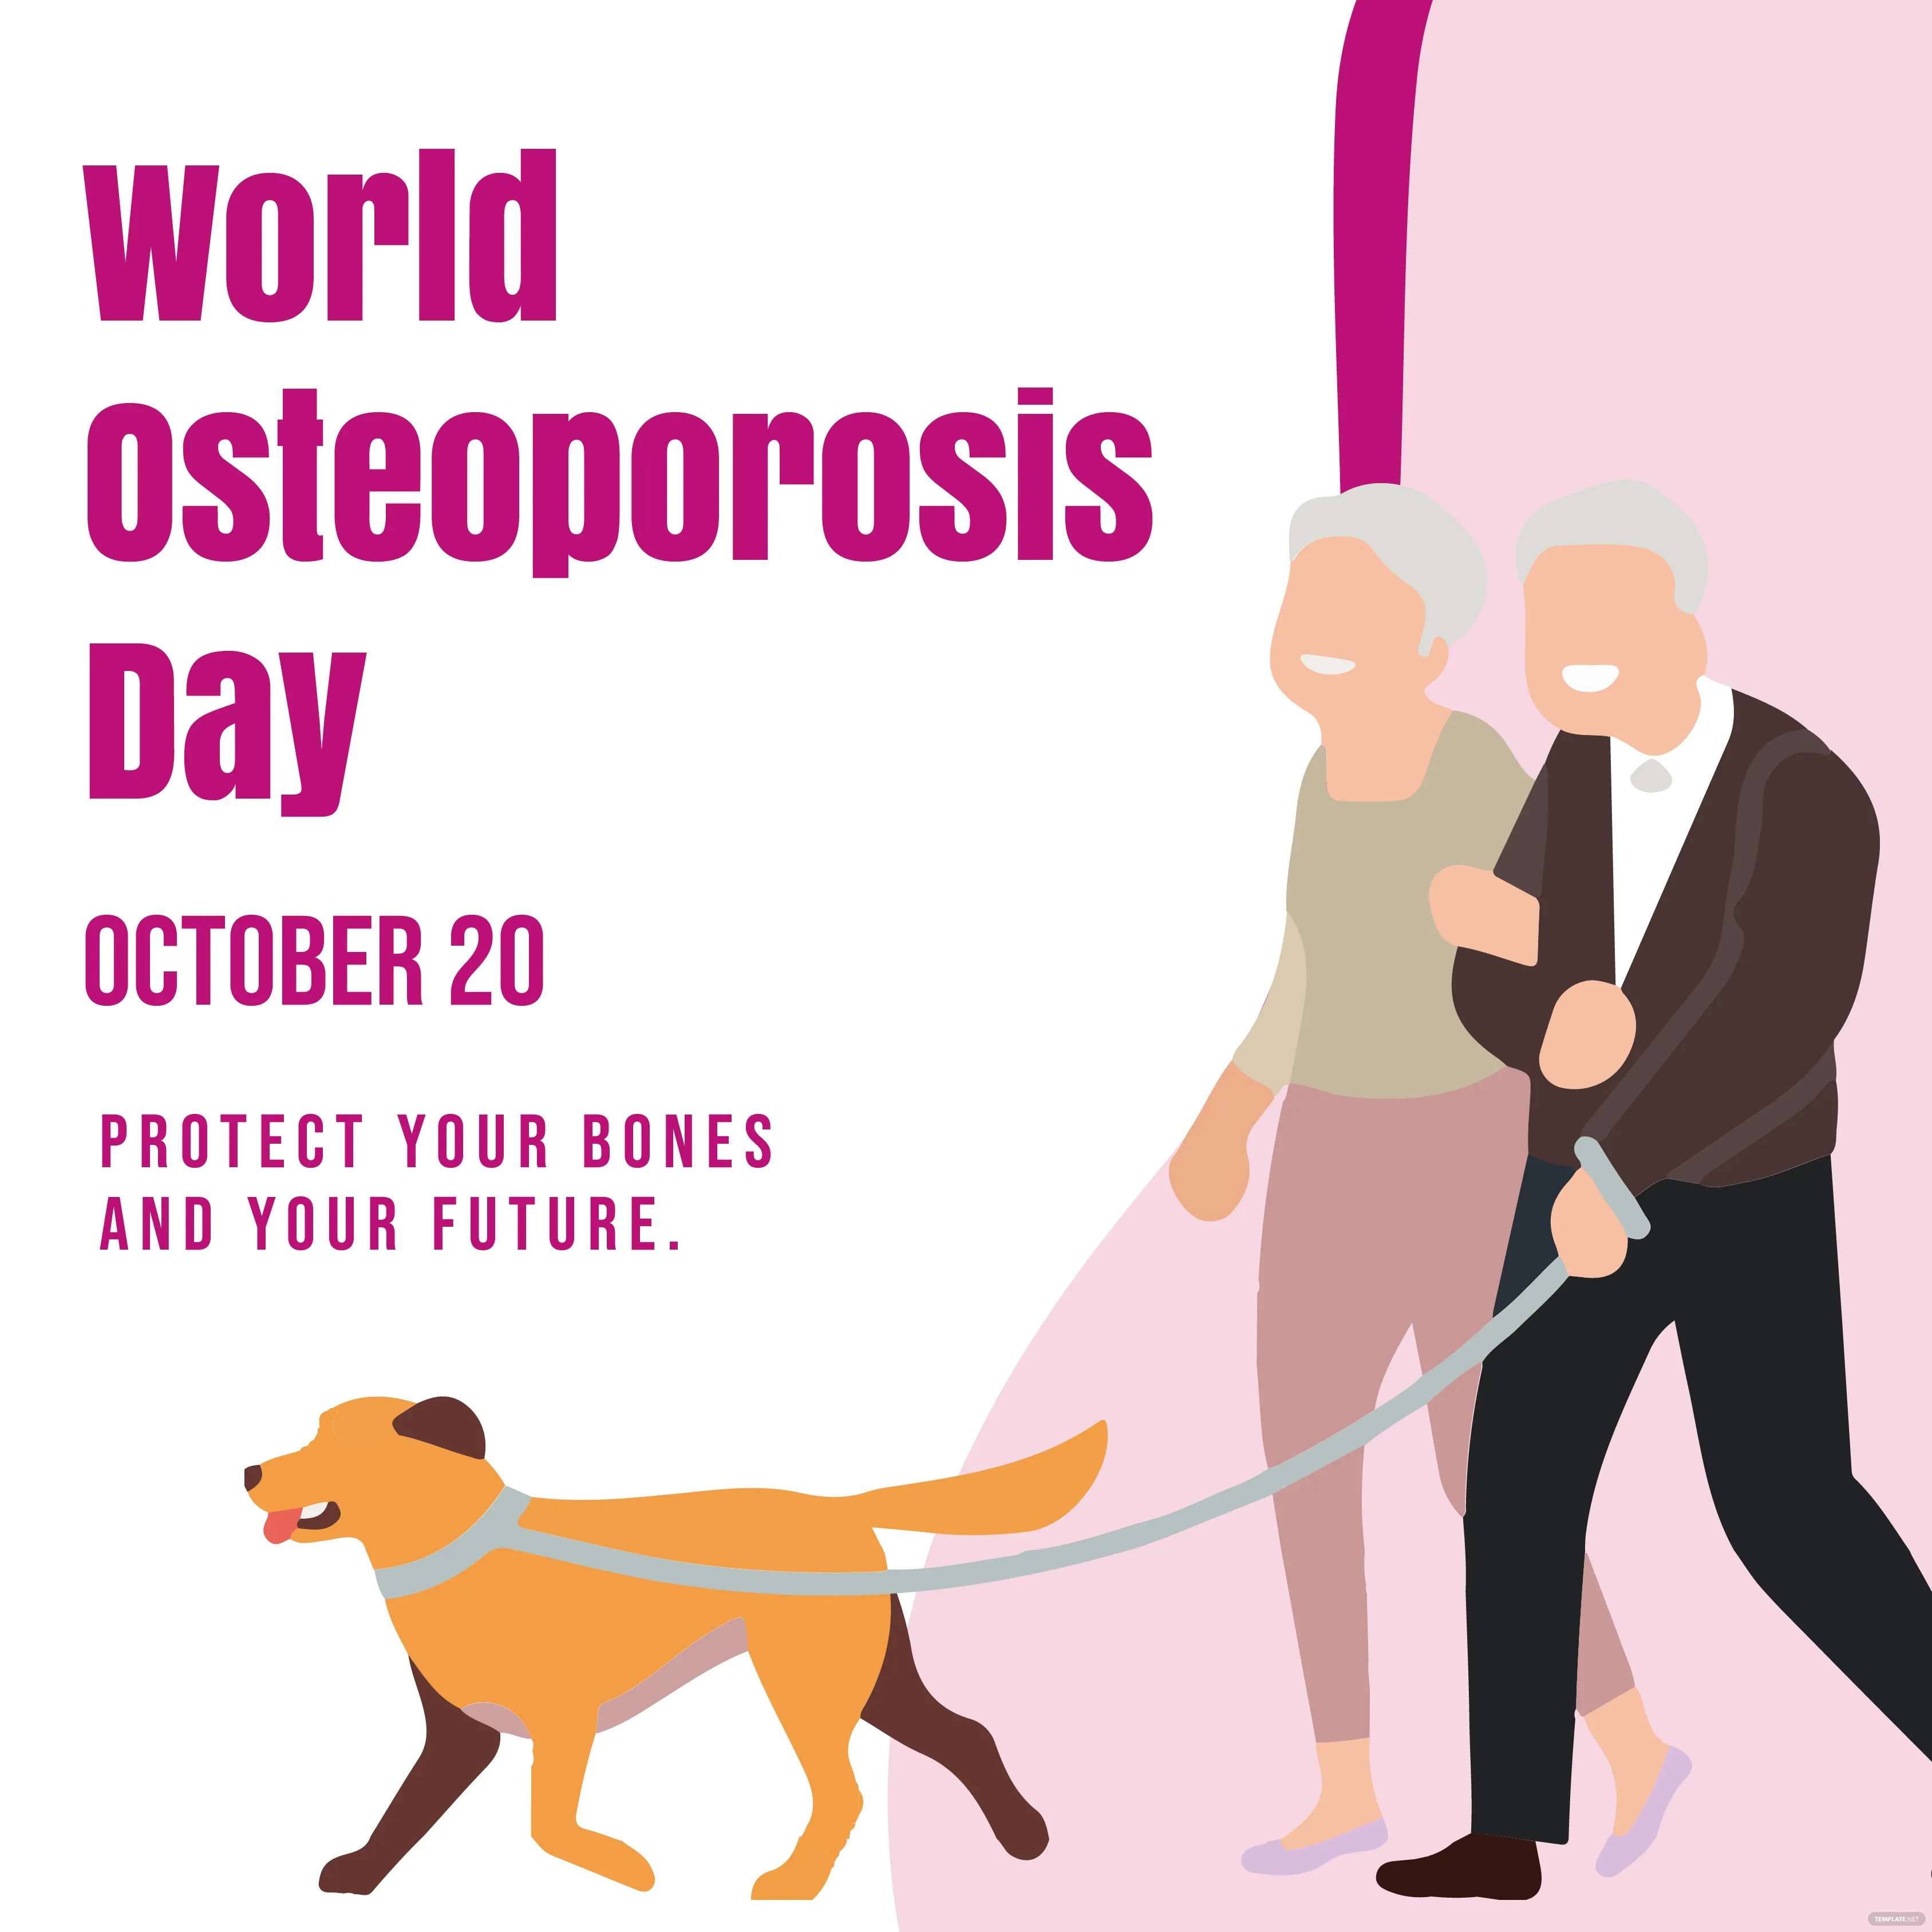 world osteoporosis day instagram post ideas examples